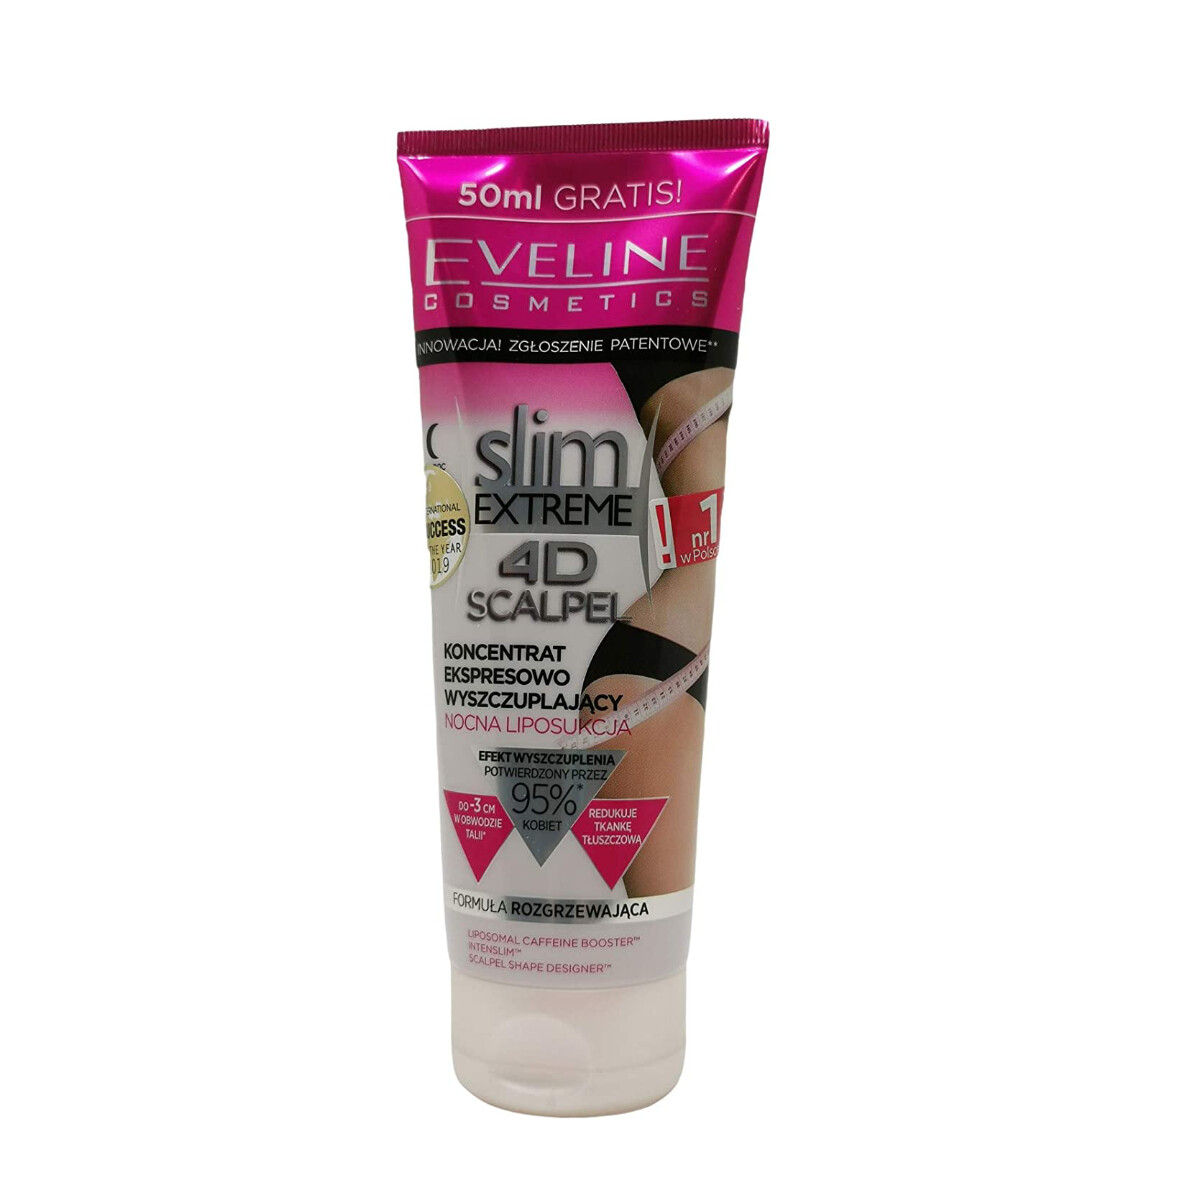 Slim Extreme 4D Scalpel Express Slimming Concentrate Night Liposuction Cream (T)